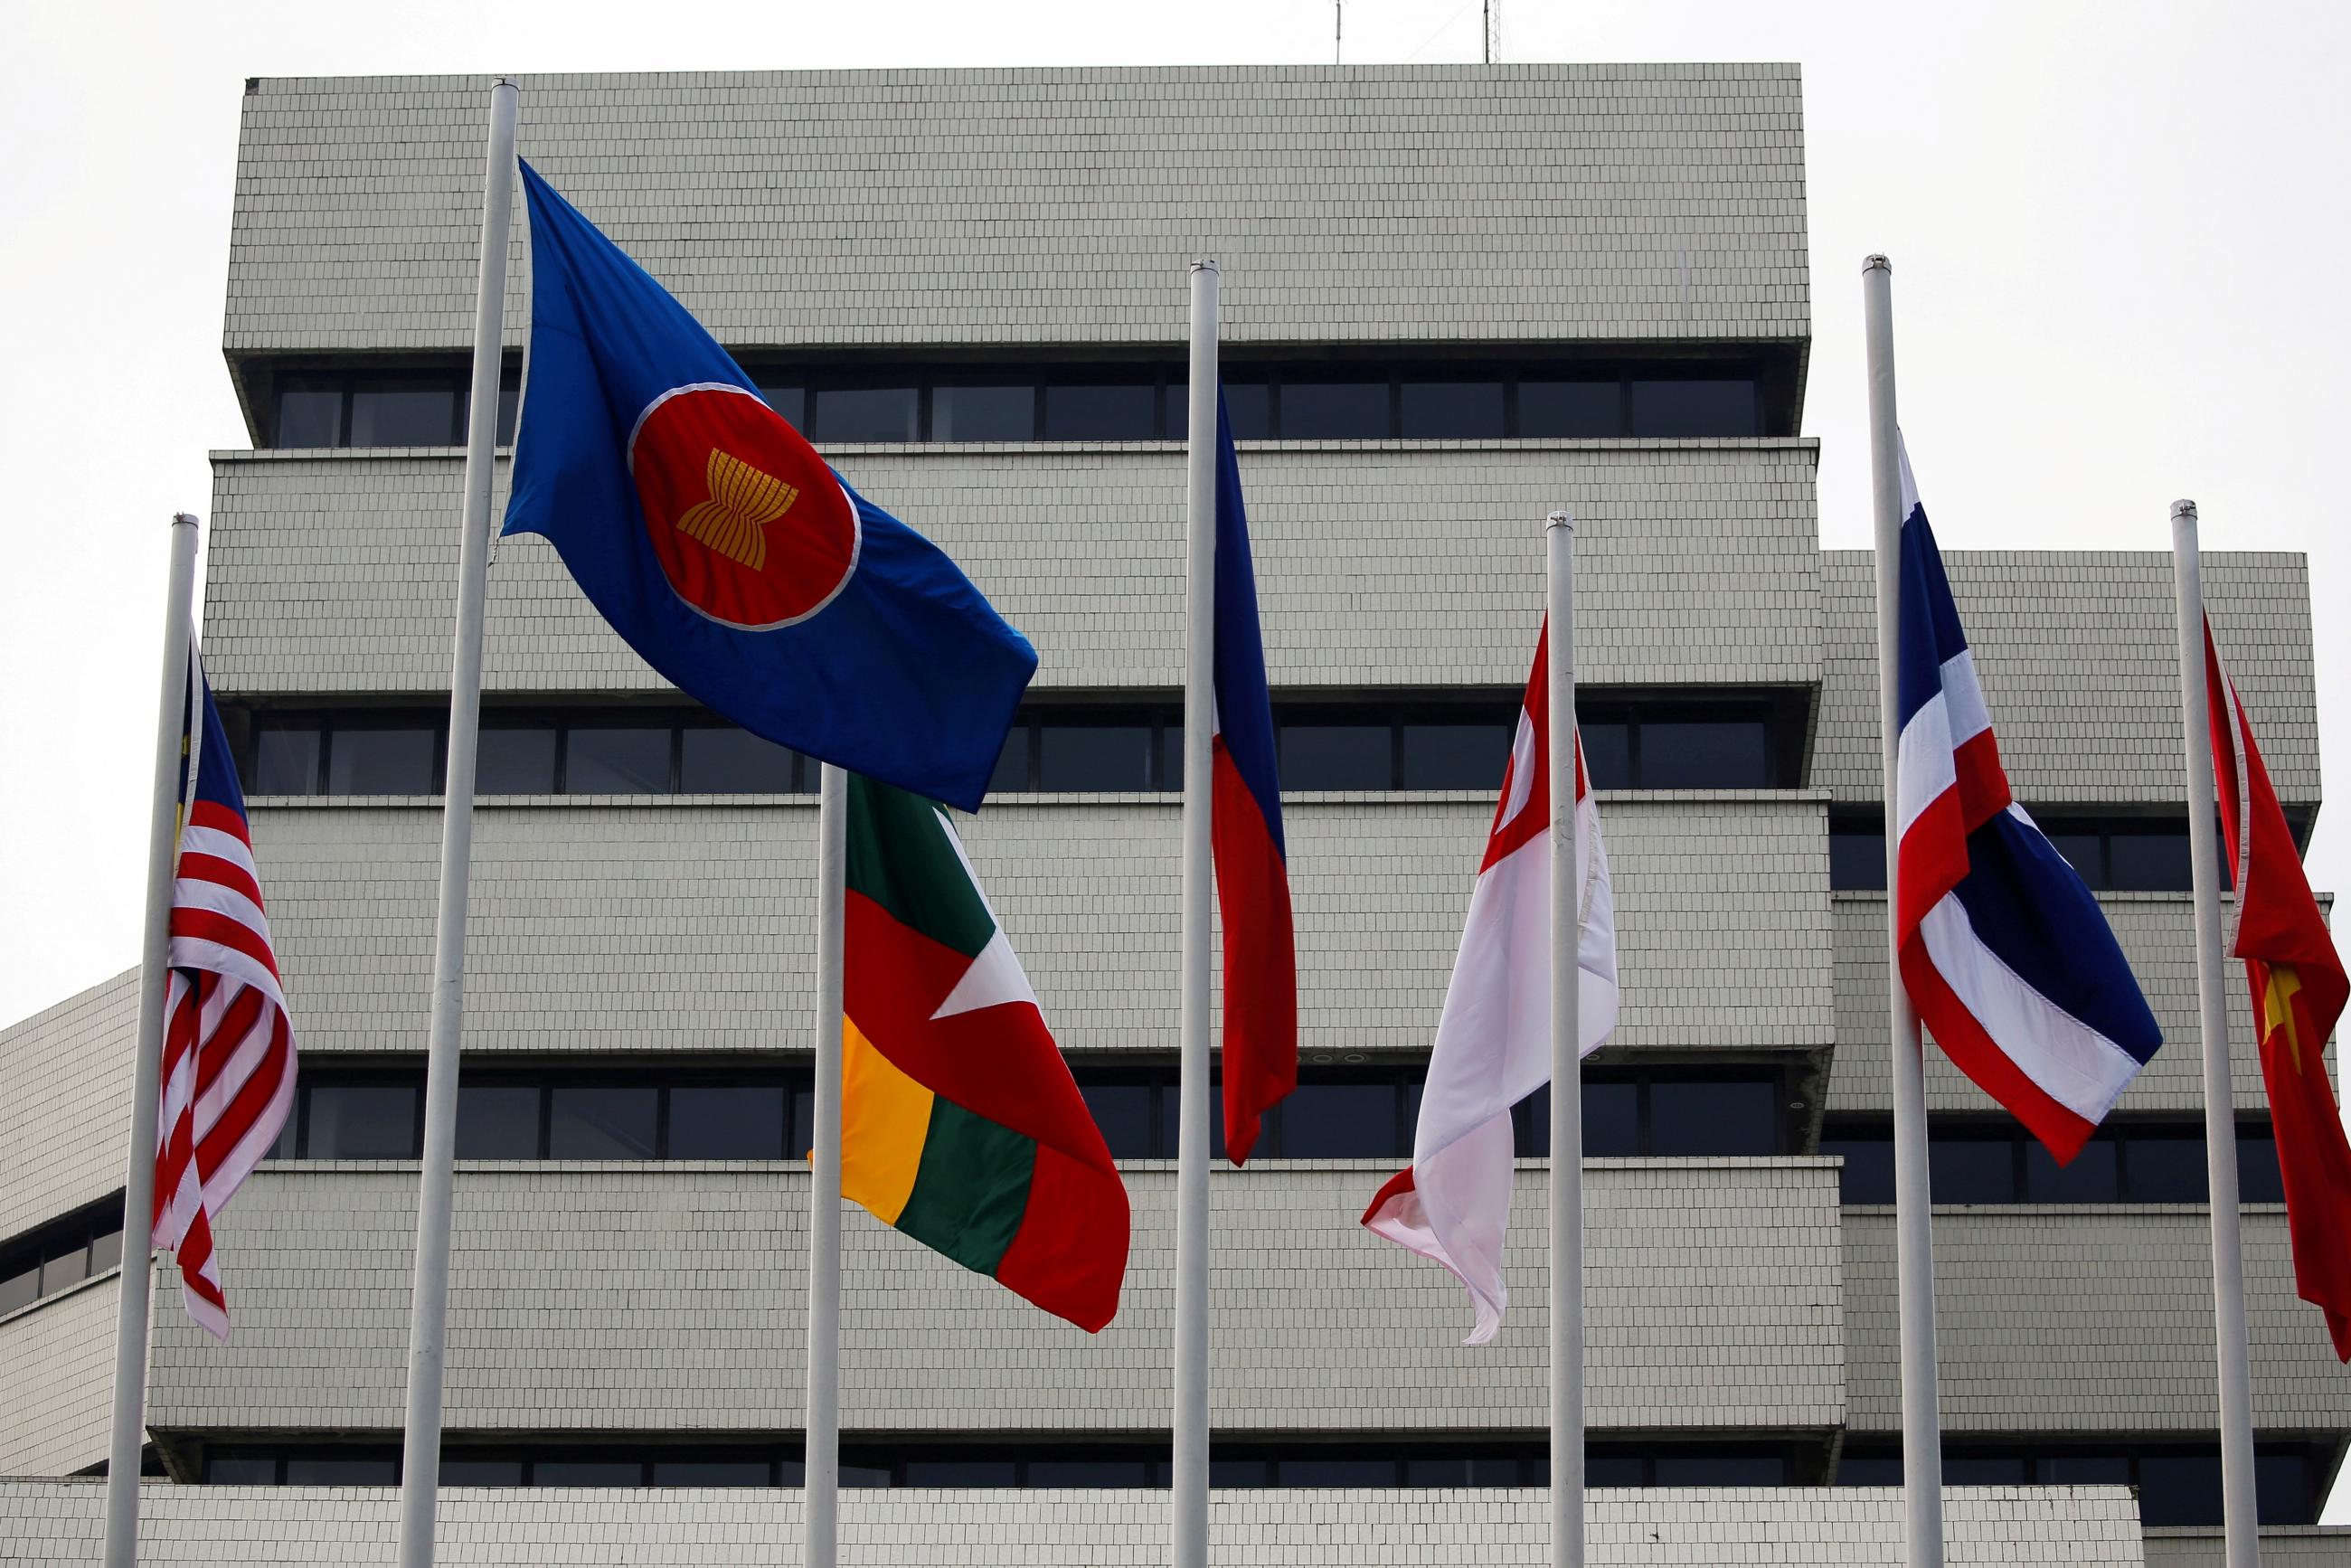 Flags are seen outside the Association of Southeast Asian Nations (ASEAN) secretariat building before an ASEAN leaders' meeting in Jakarta, Indonesia, April 23, 2021.